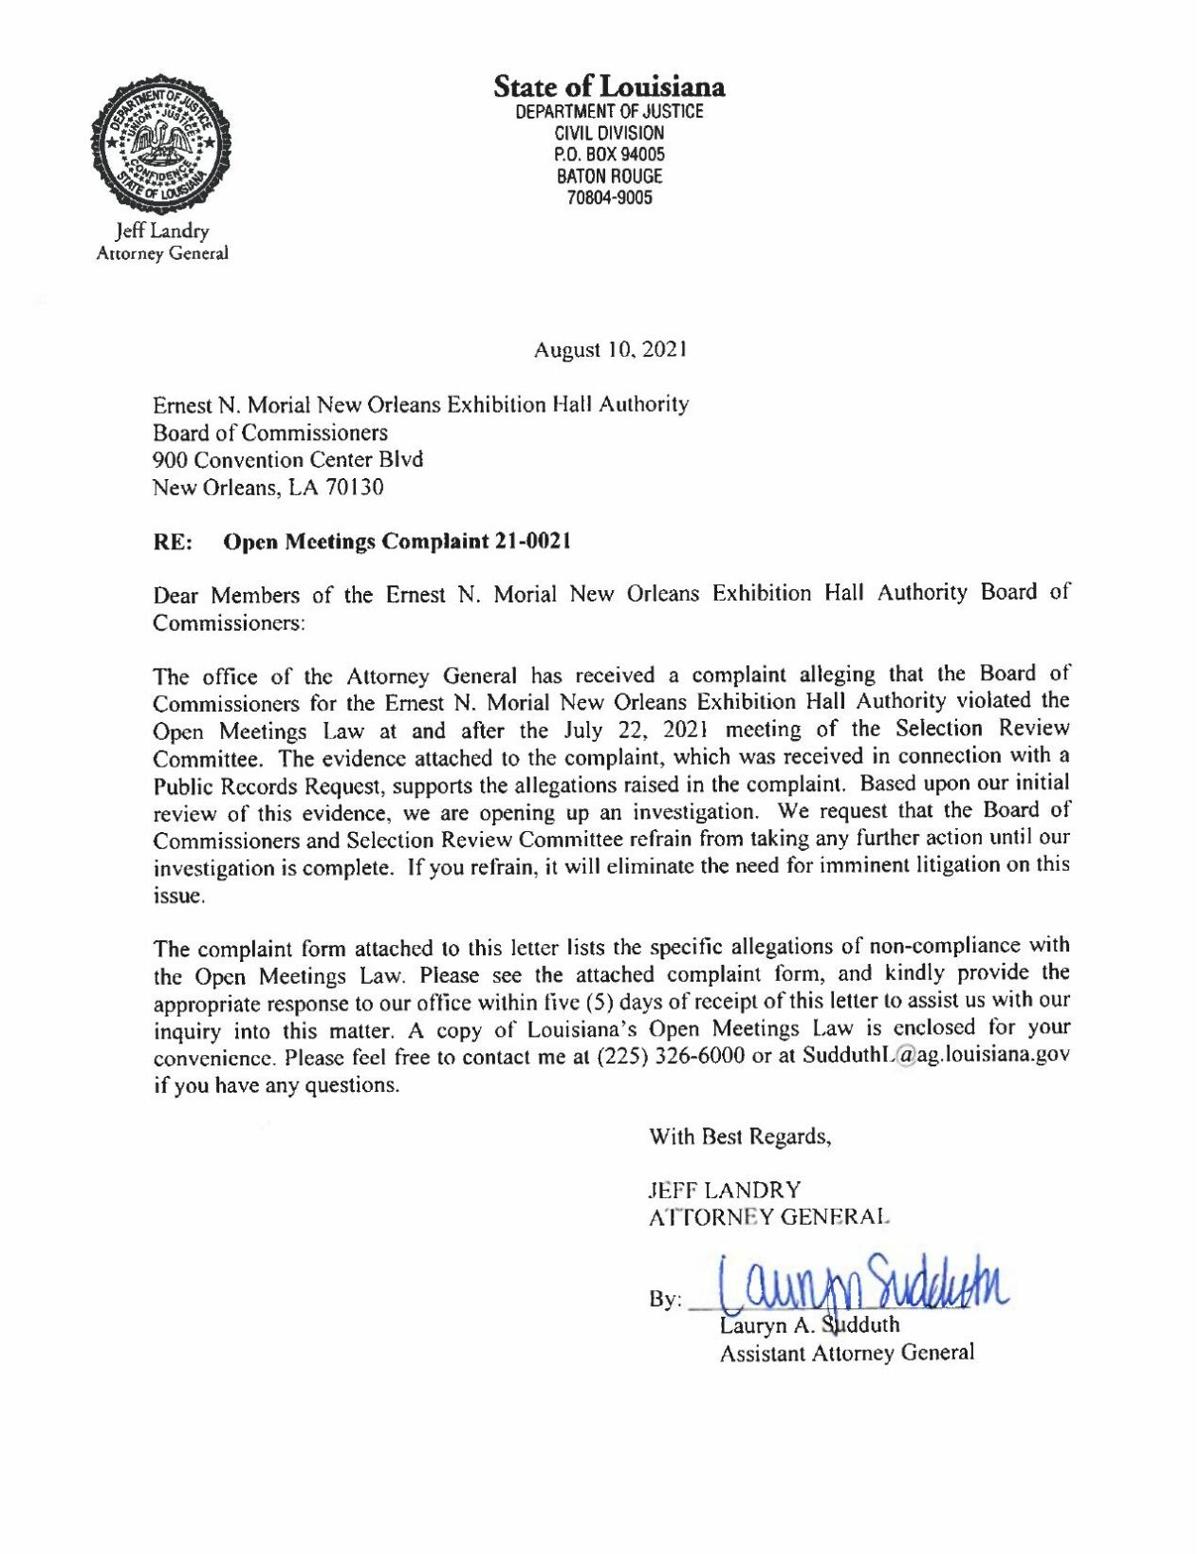 Louisiana AG's letter to the Convention Center board